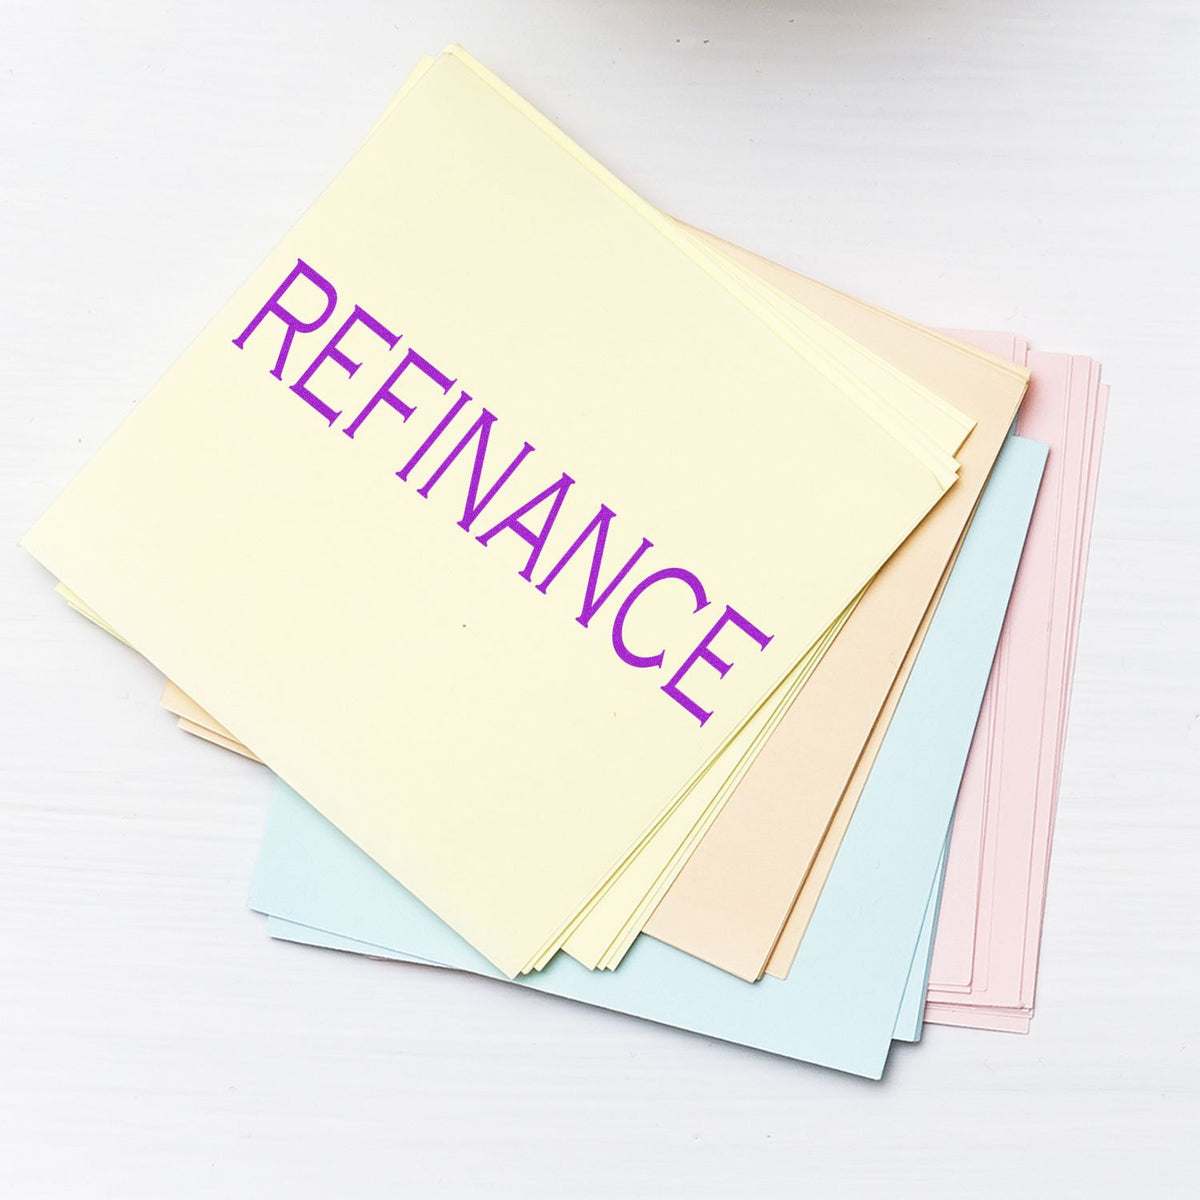 Large Refinance Rubber Stamp In Use